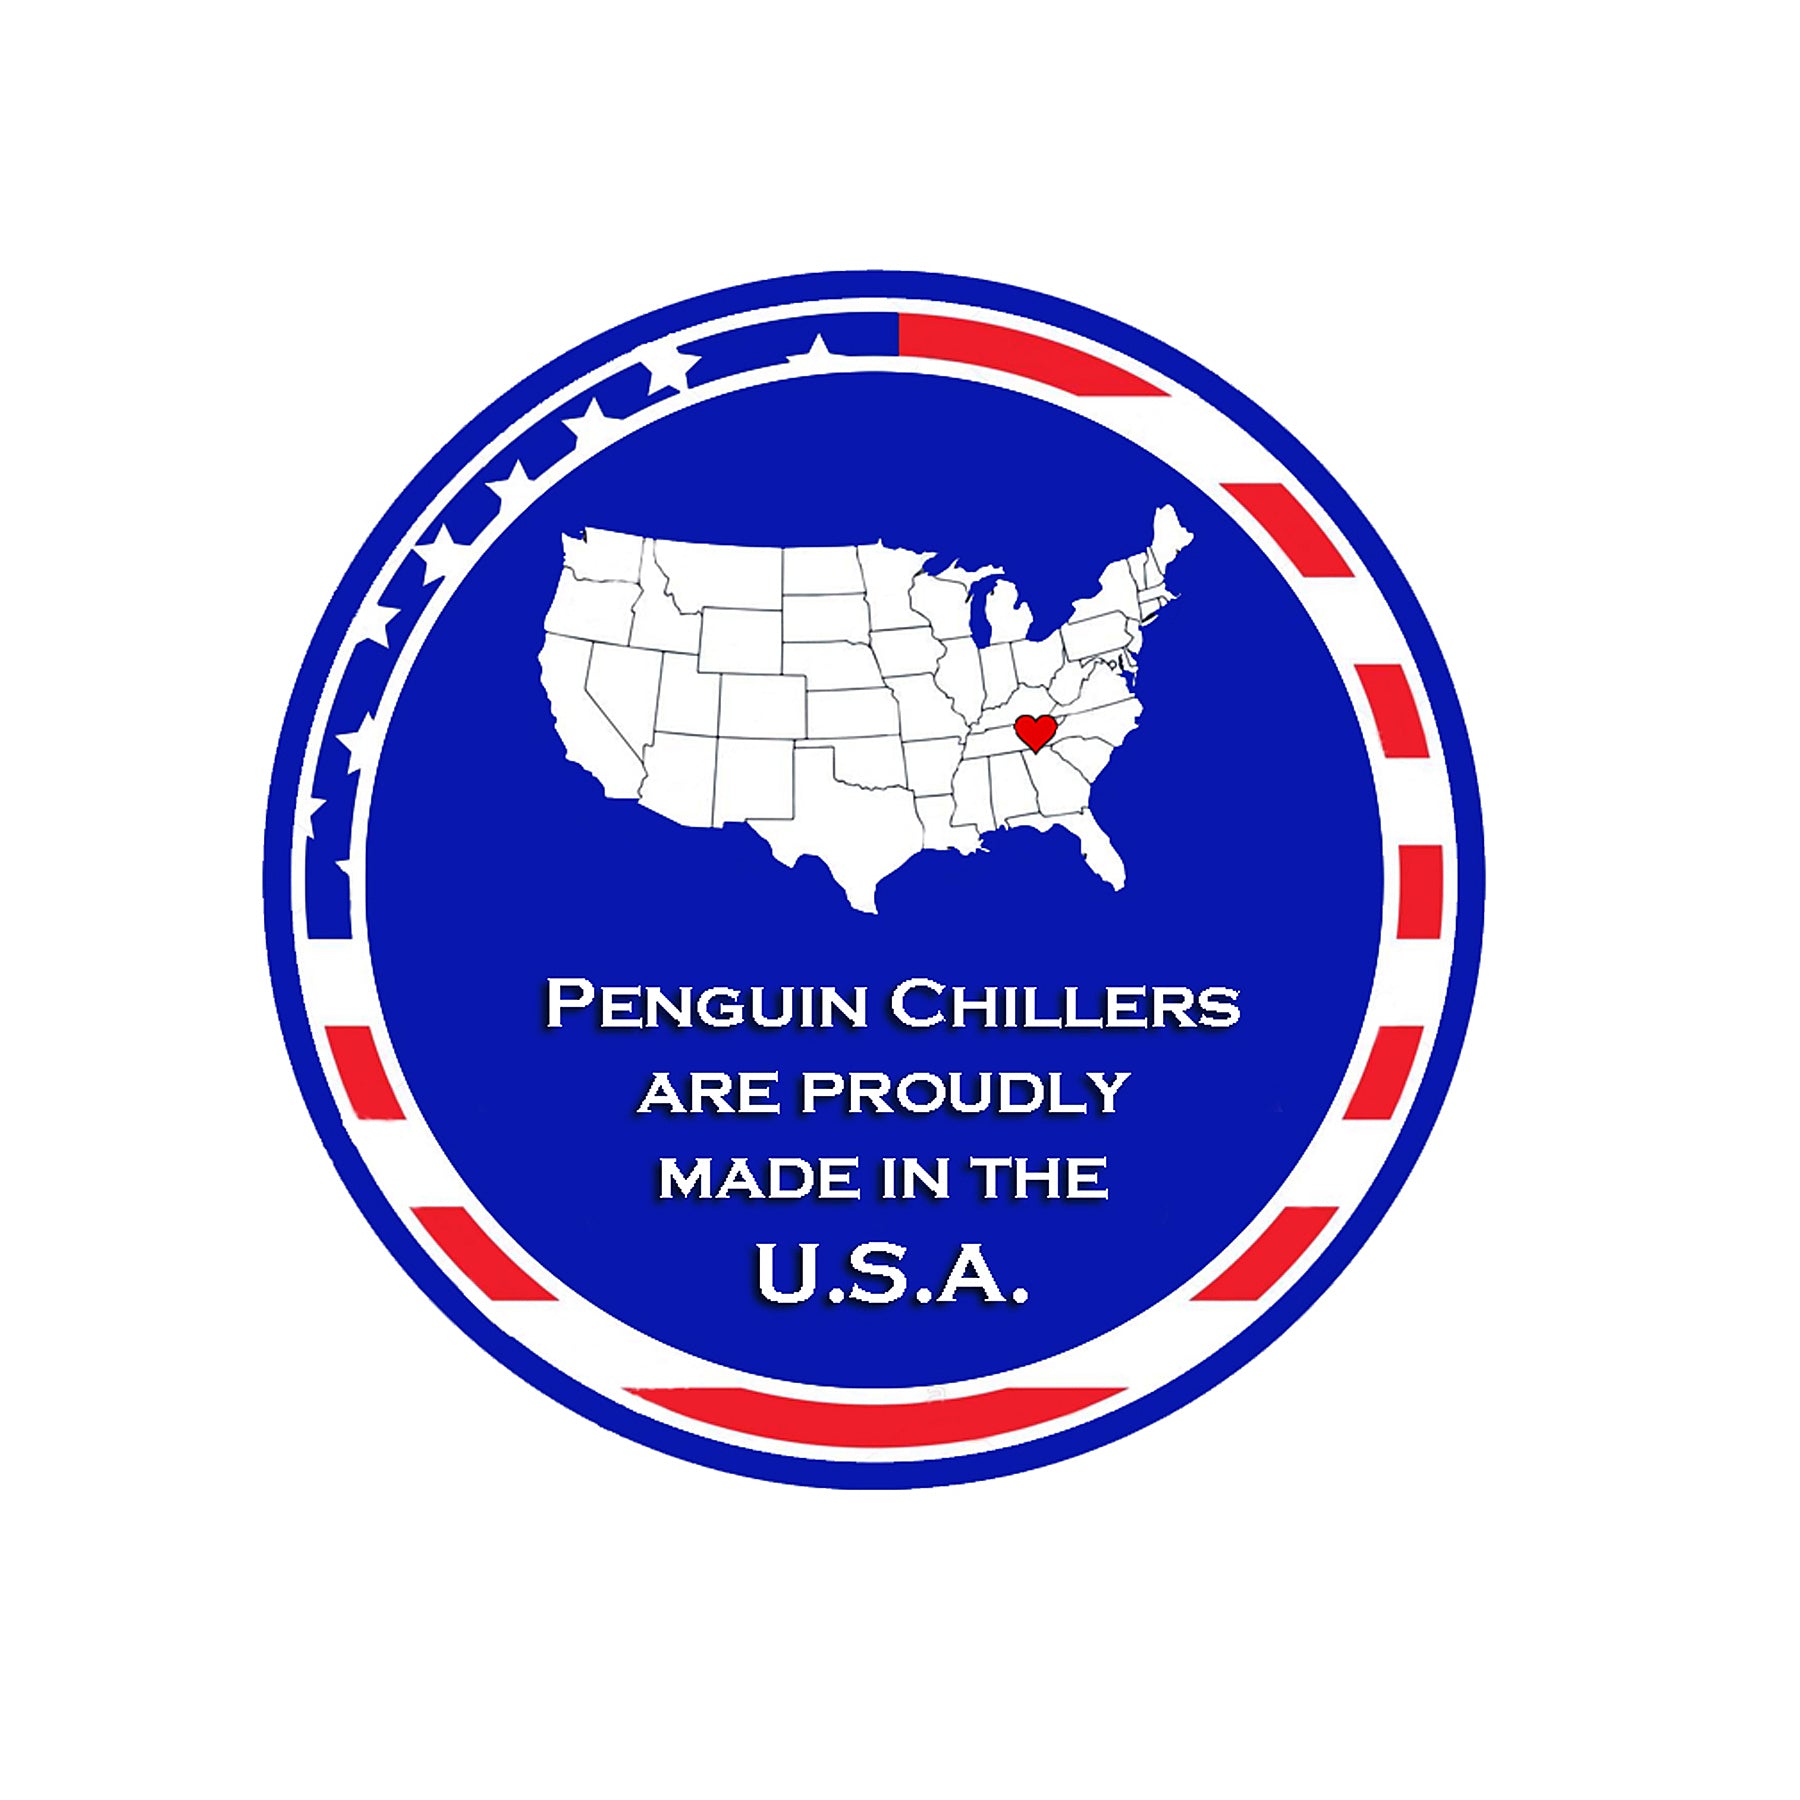 Penguin Chillers made in the USA